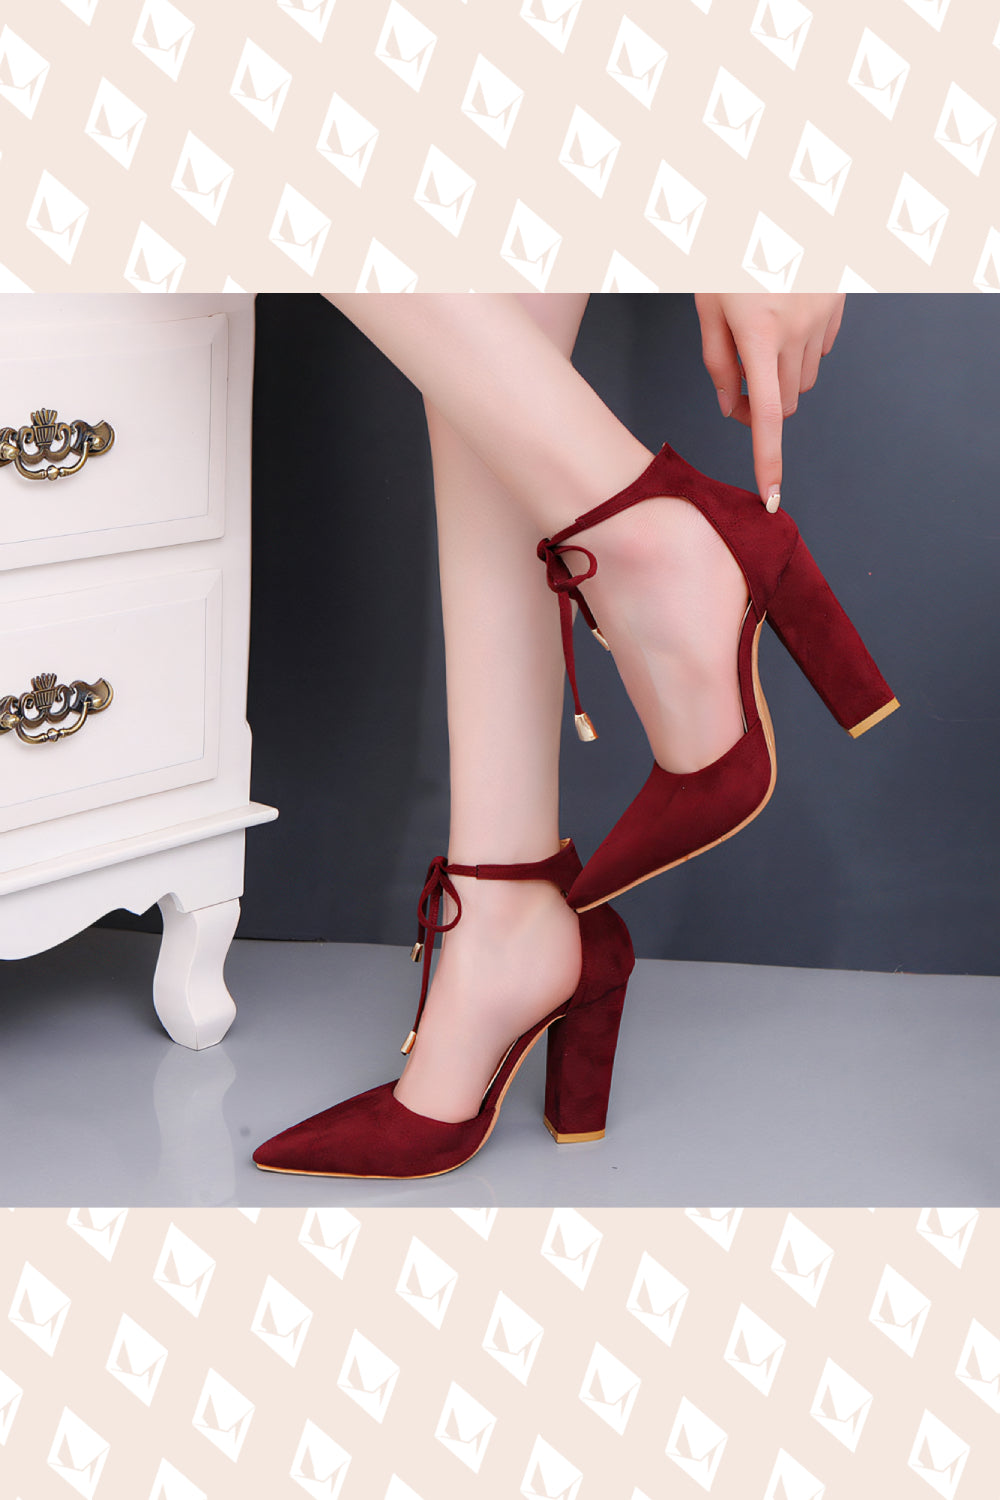 Simply Refined Heels - Red - Strange Clothes